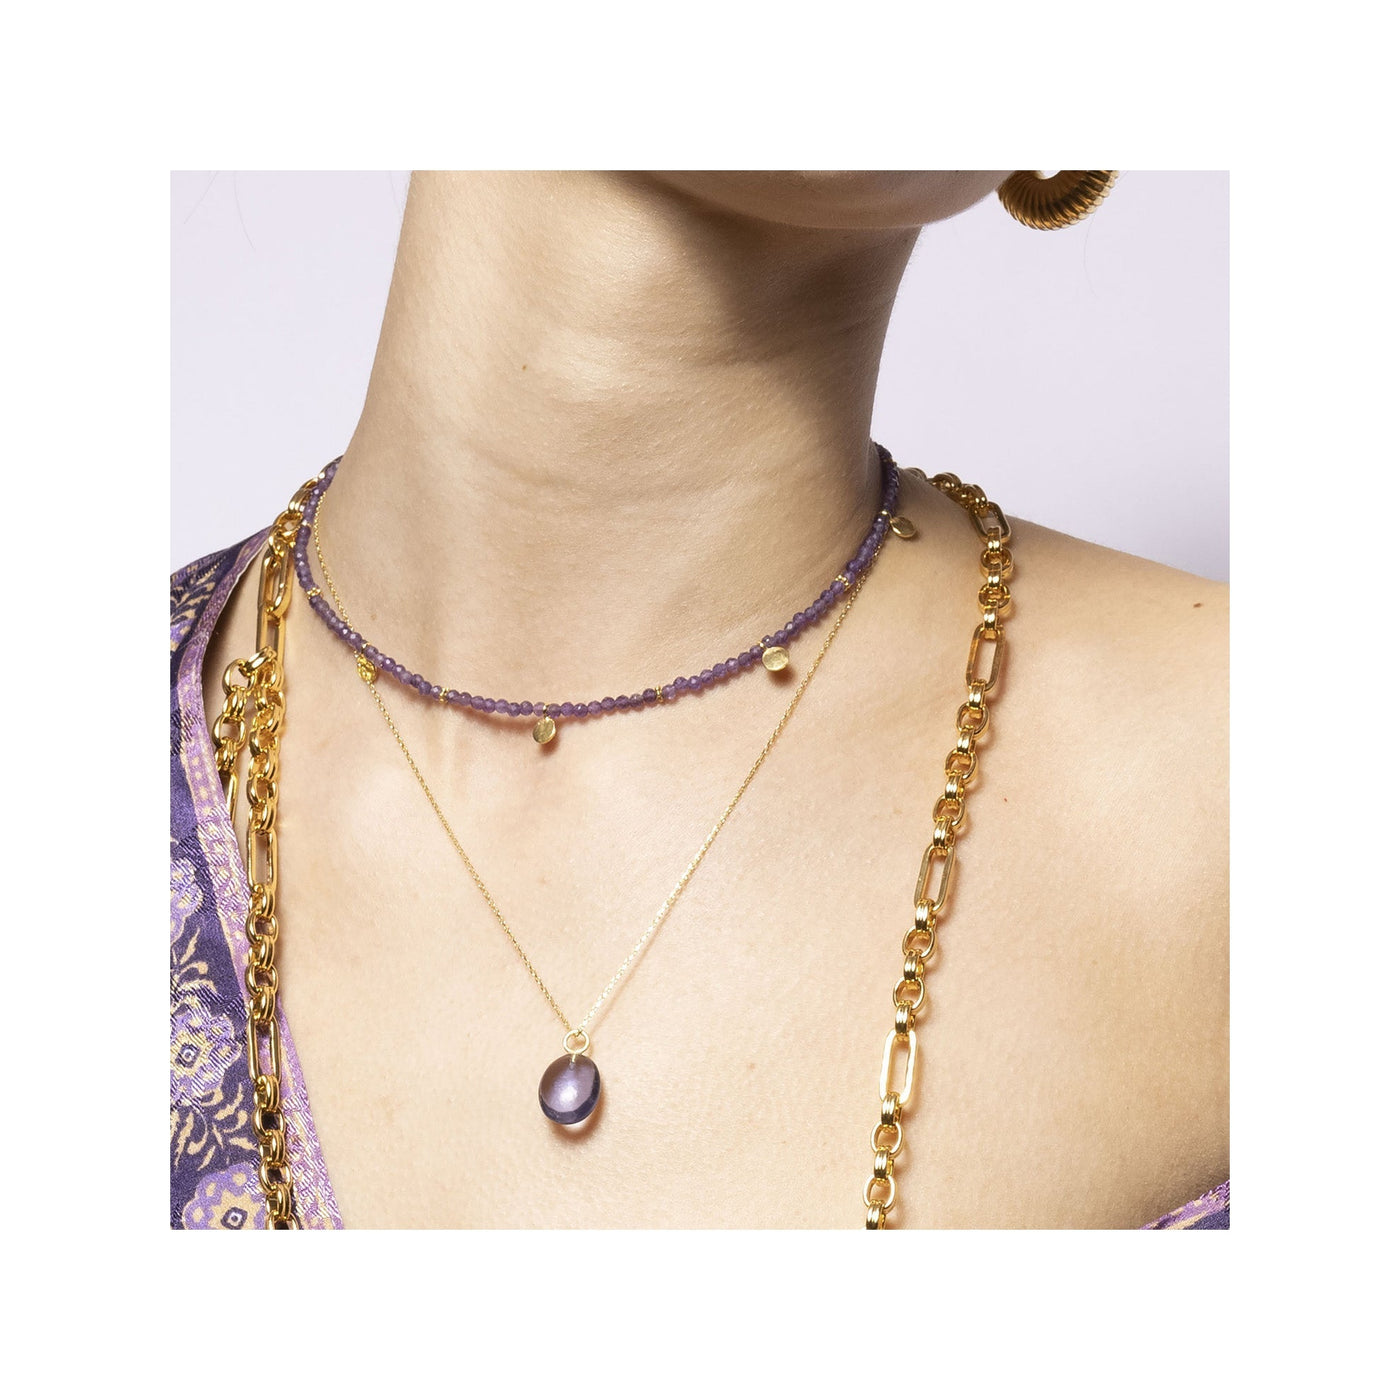 Eden Gold Chain Necklace with Amethyst Pendant